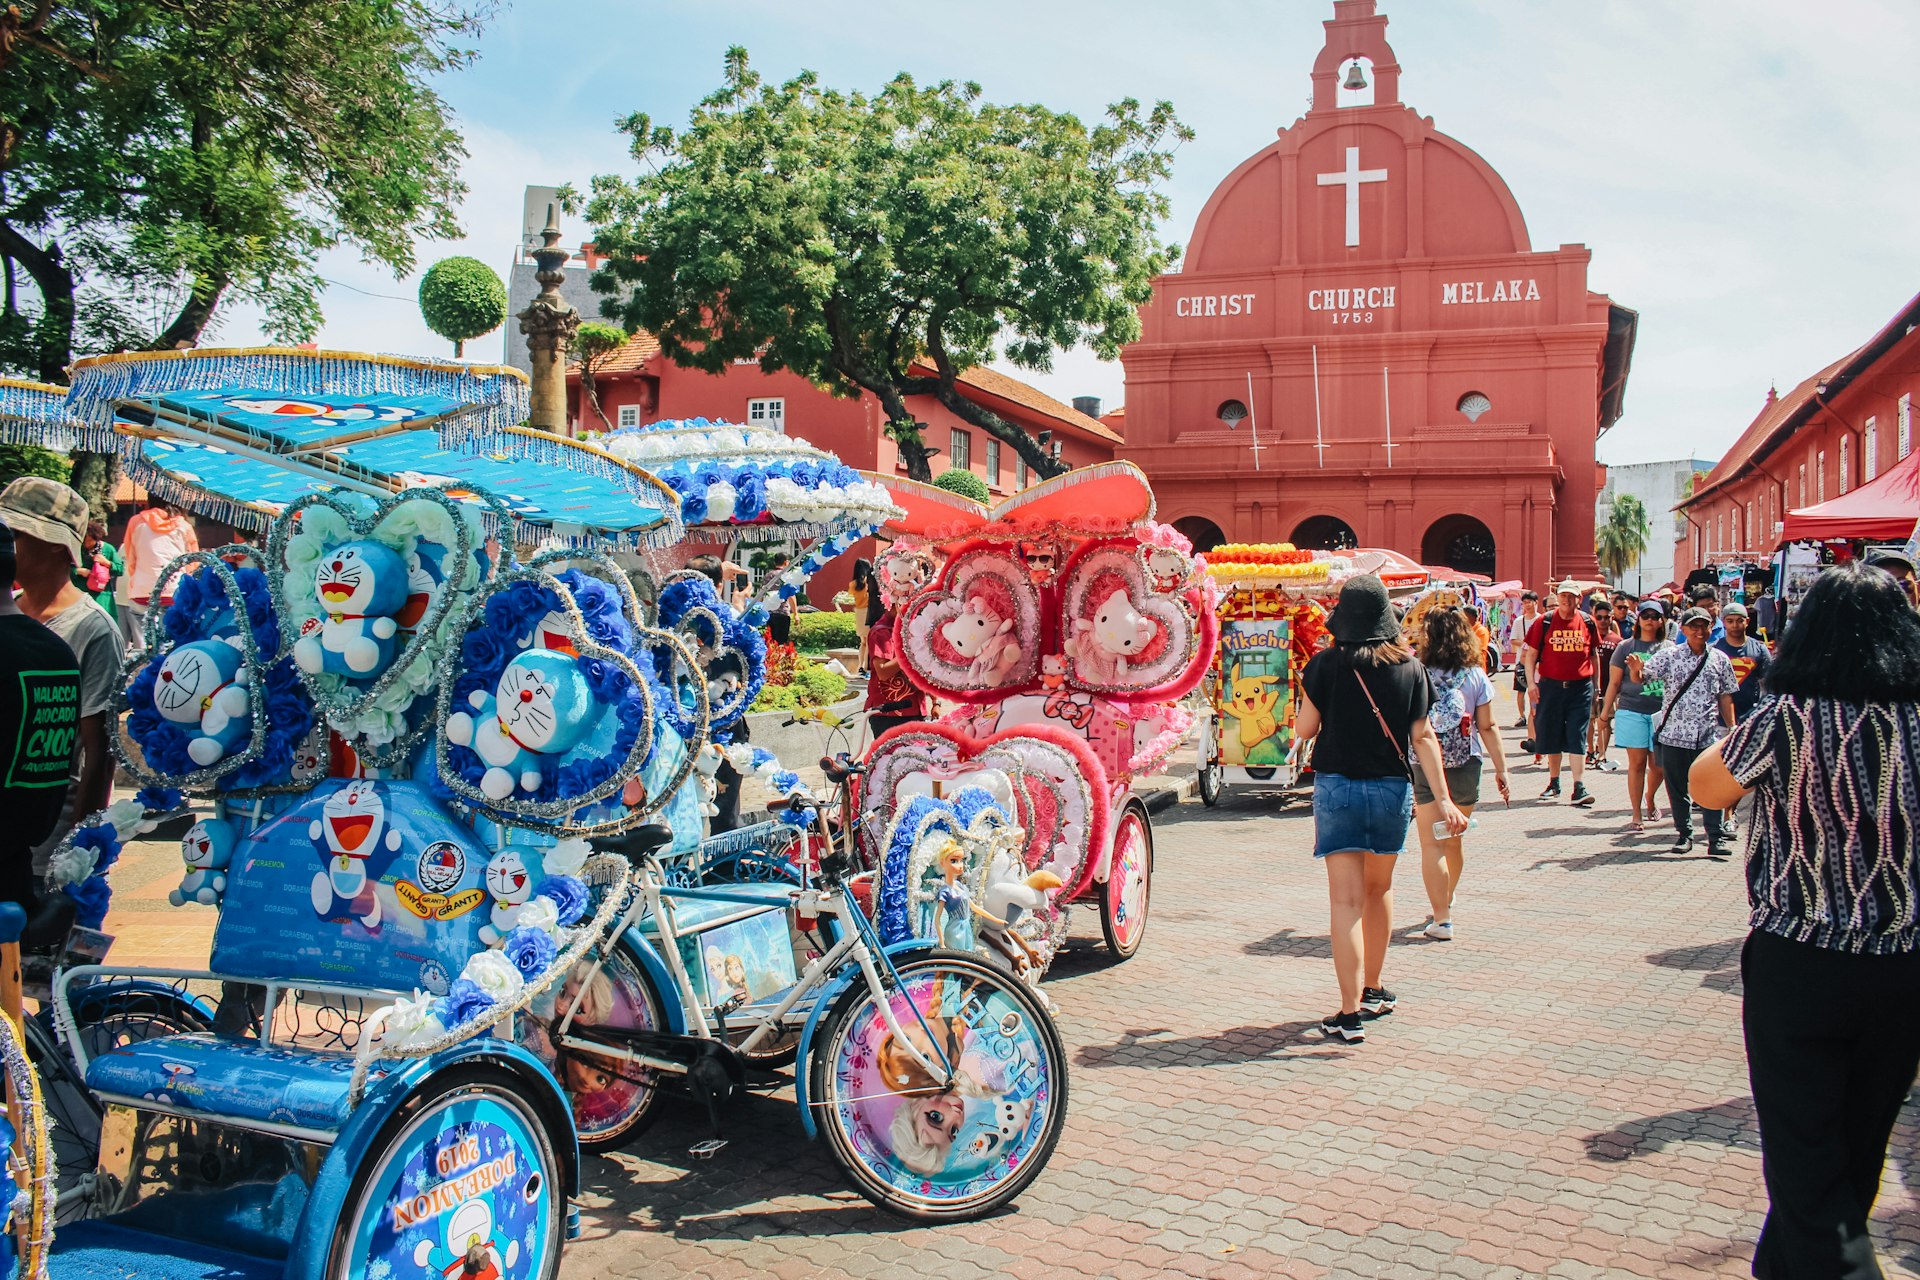 A row of colorful four-wheel cycles stand in a main square backed by a large church building painted red